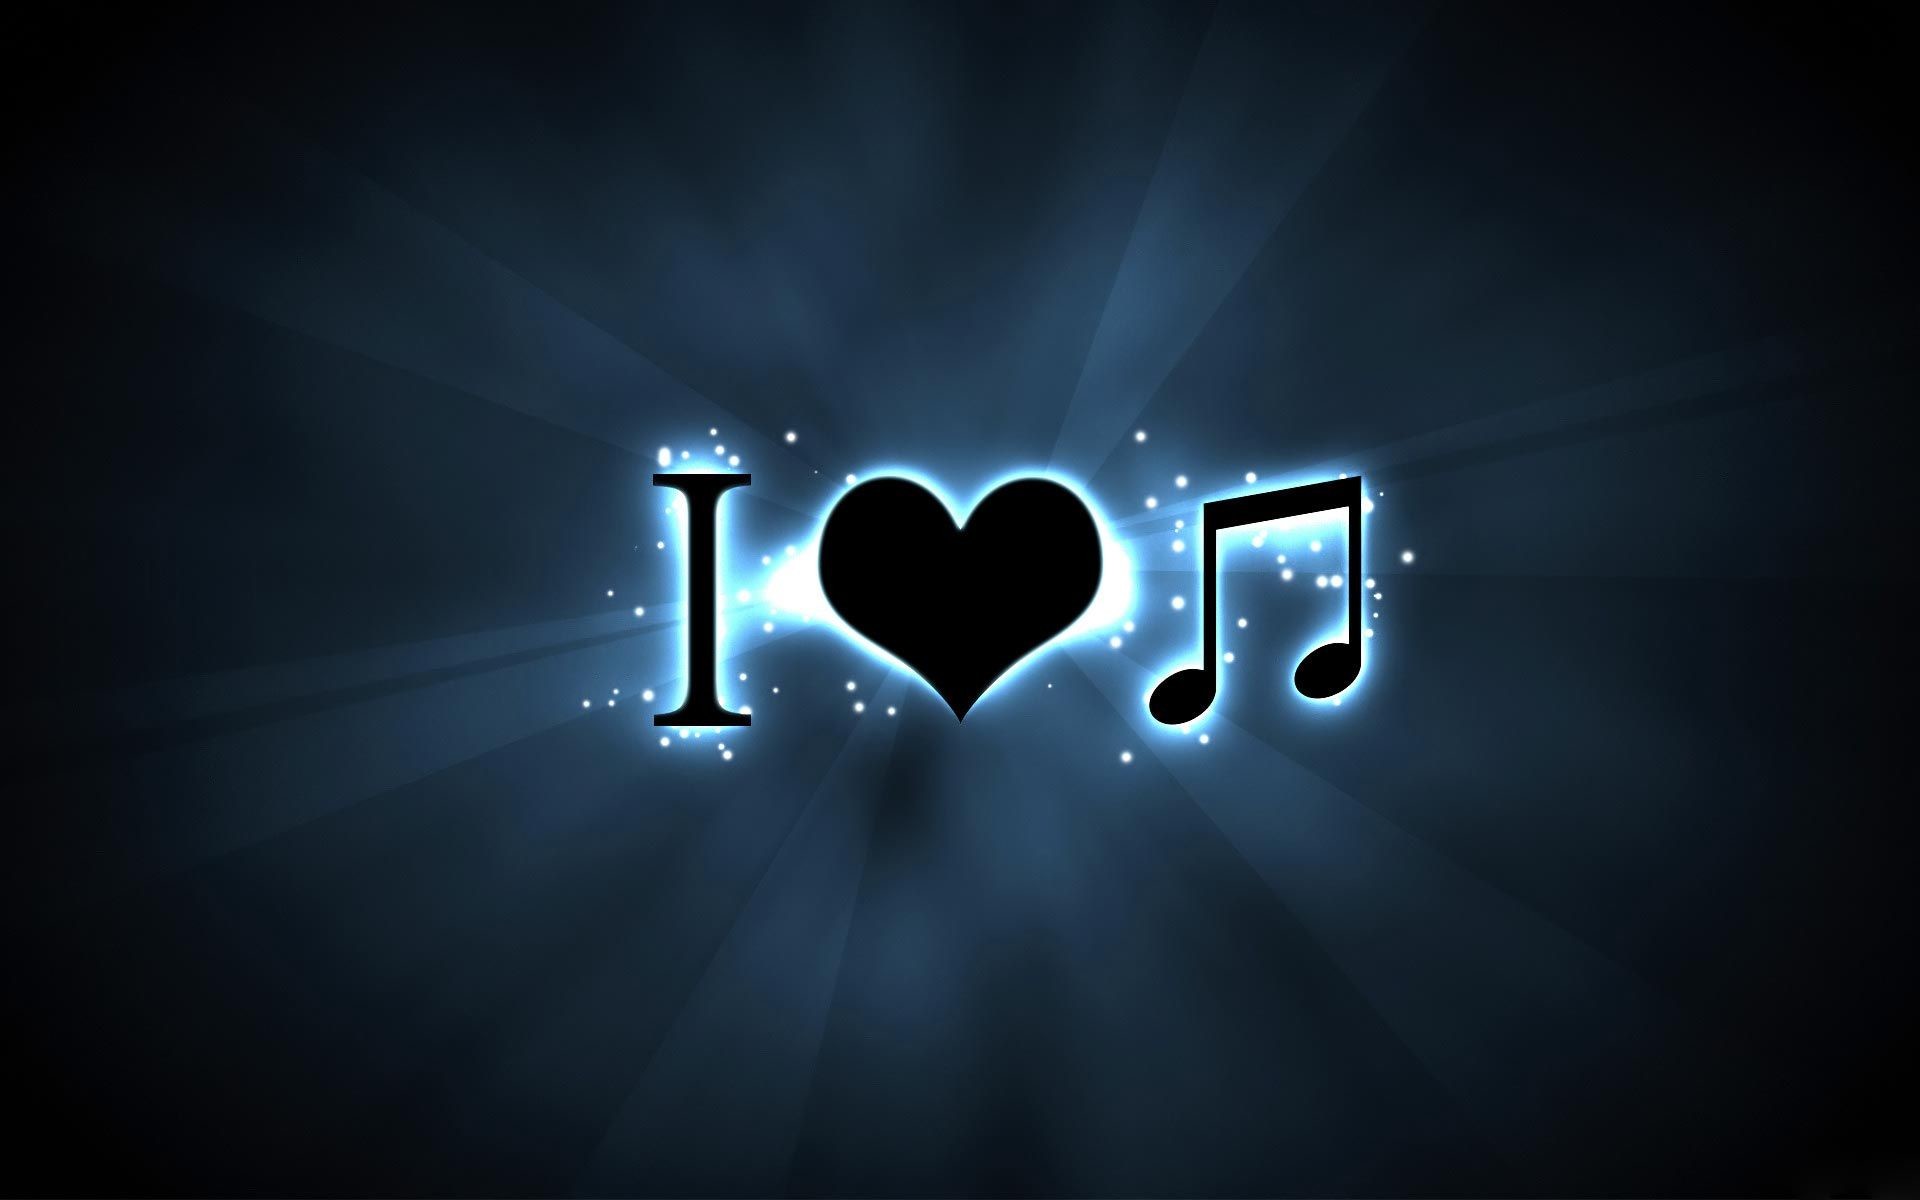 1920x1200 awsome wide screen wallpapers | wallpapers love music dubstep awesome  widescreen 